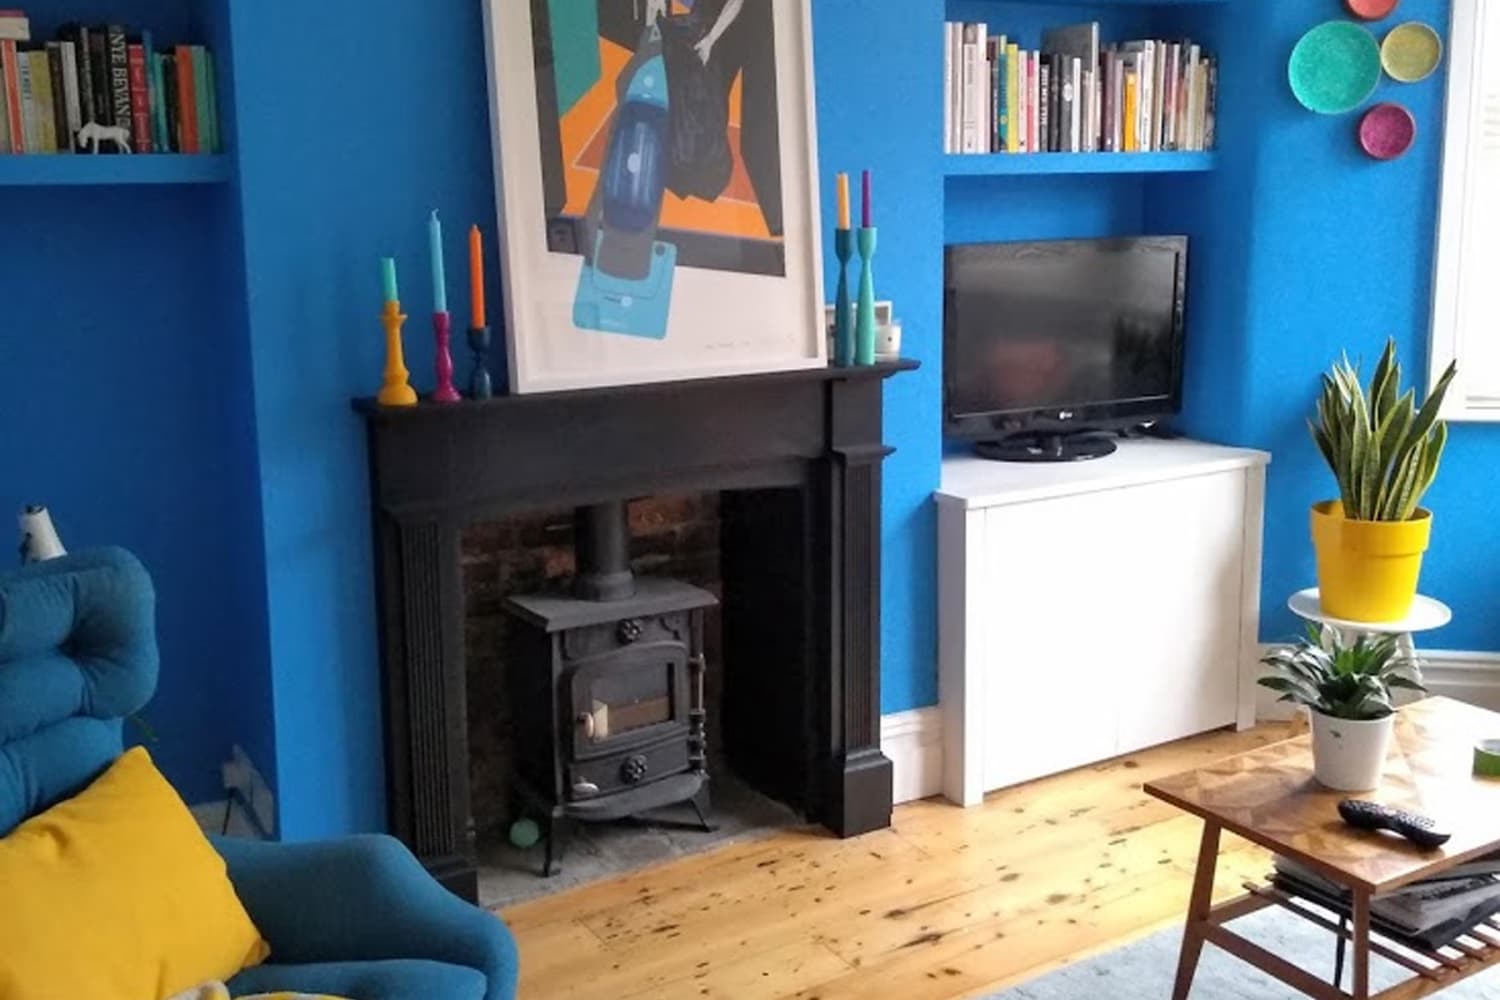 A Gorgeous UK Victorian Features Colorful Paint on the Walls and Furniture